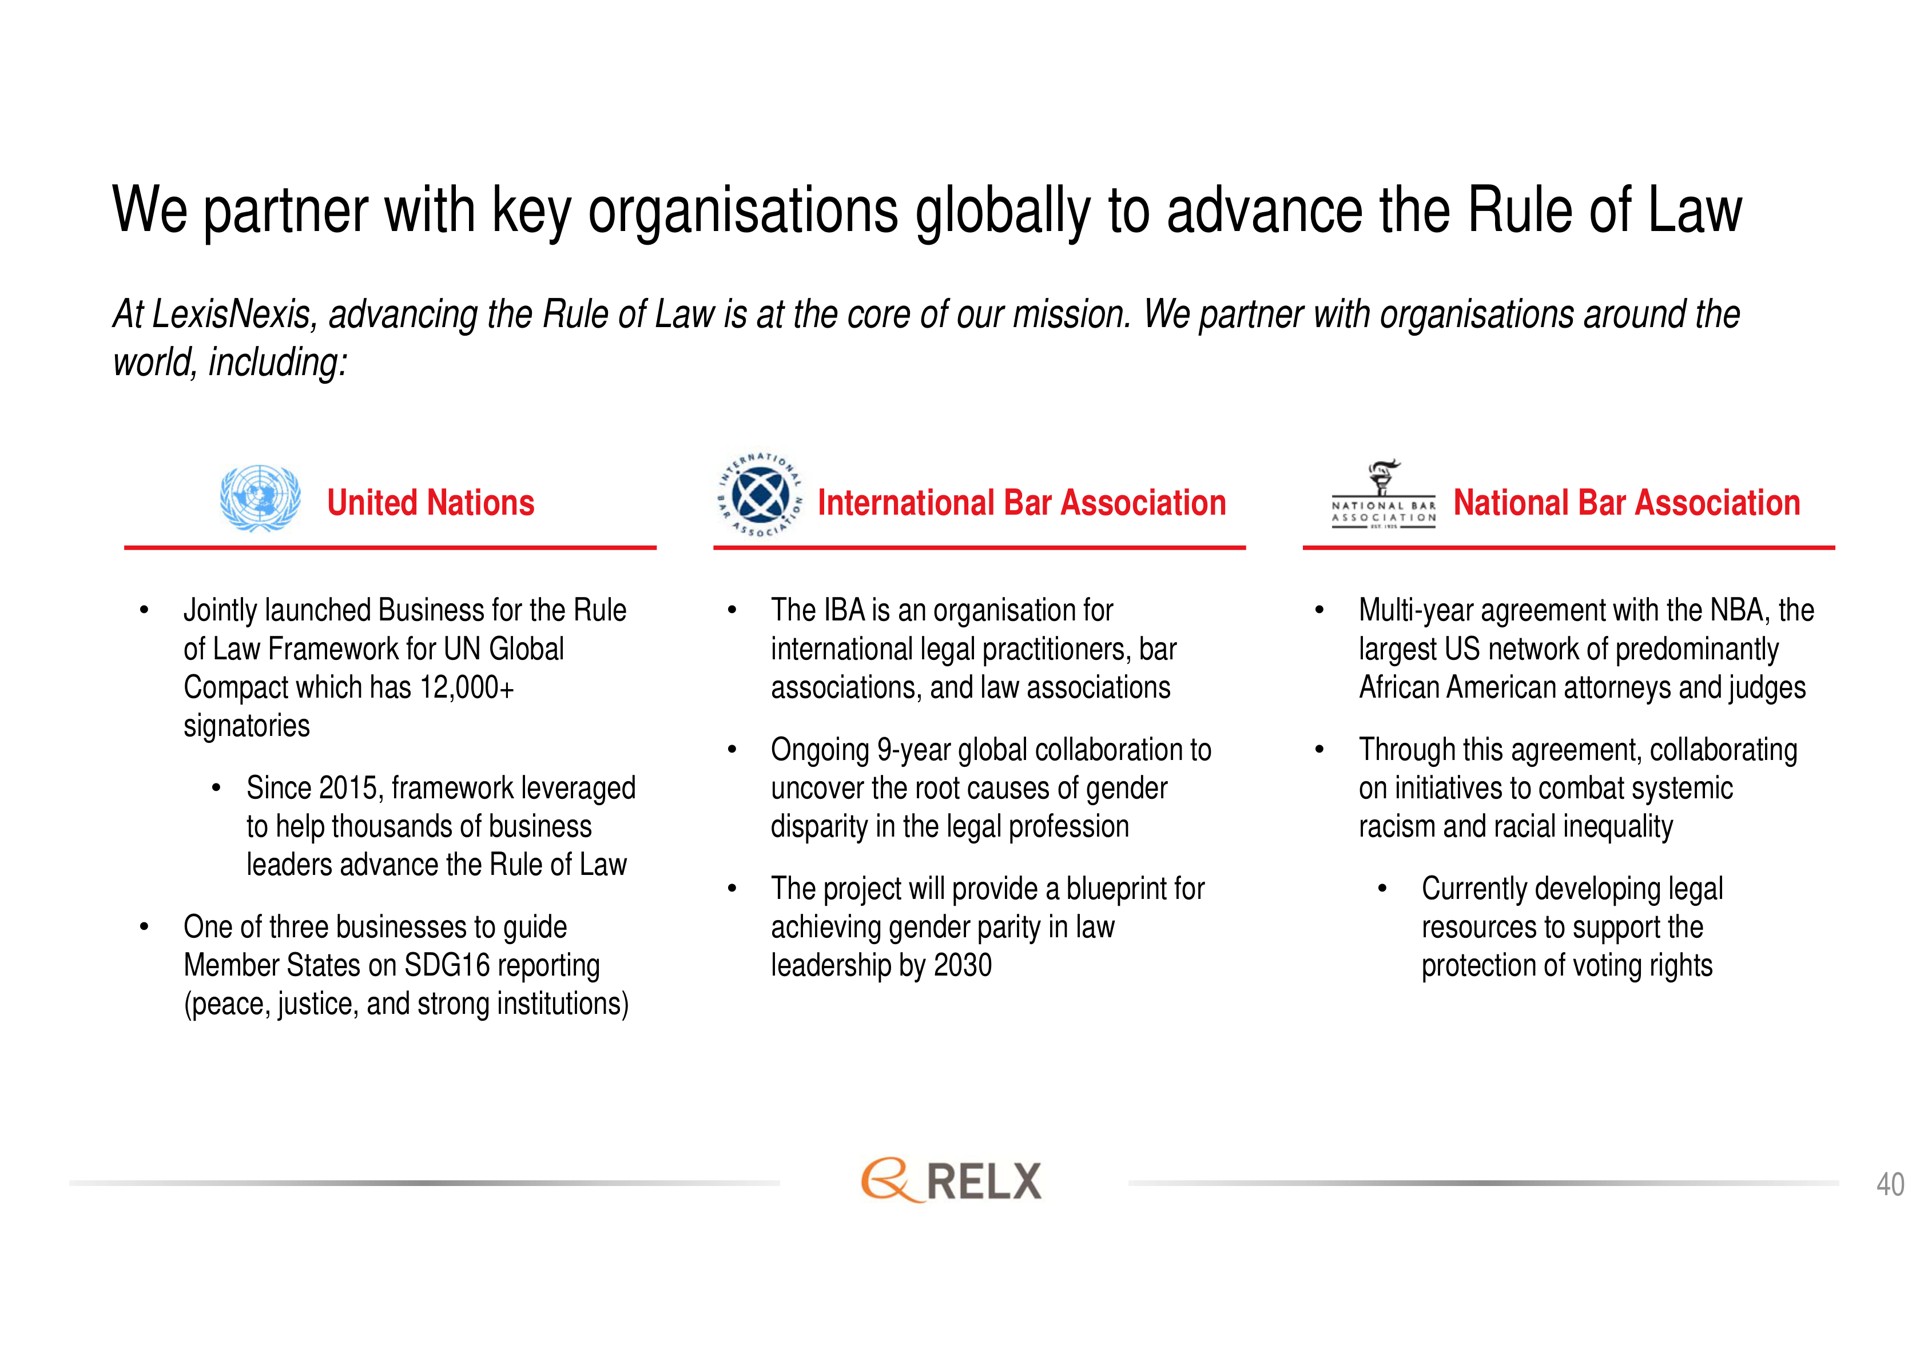 we partner with key globally to advance the rule of law | RELX